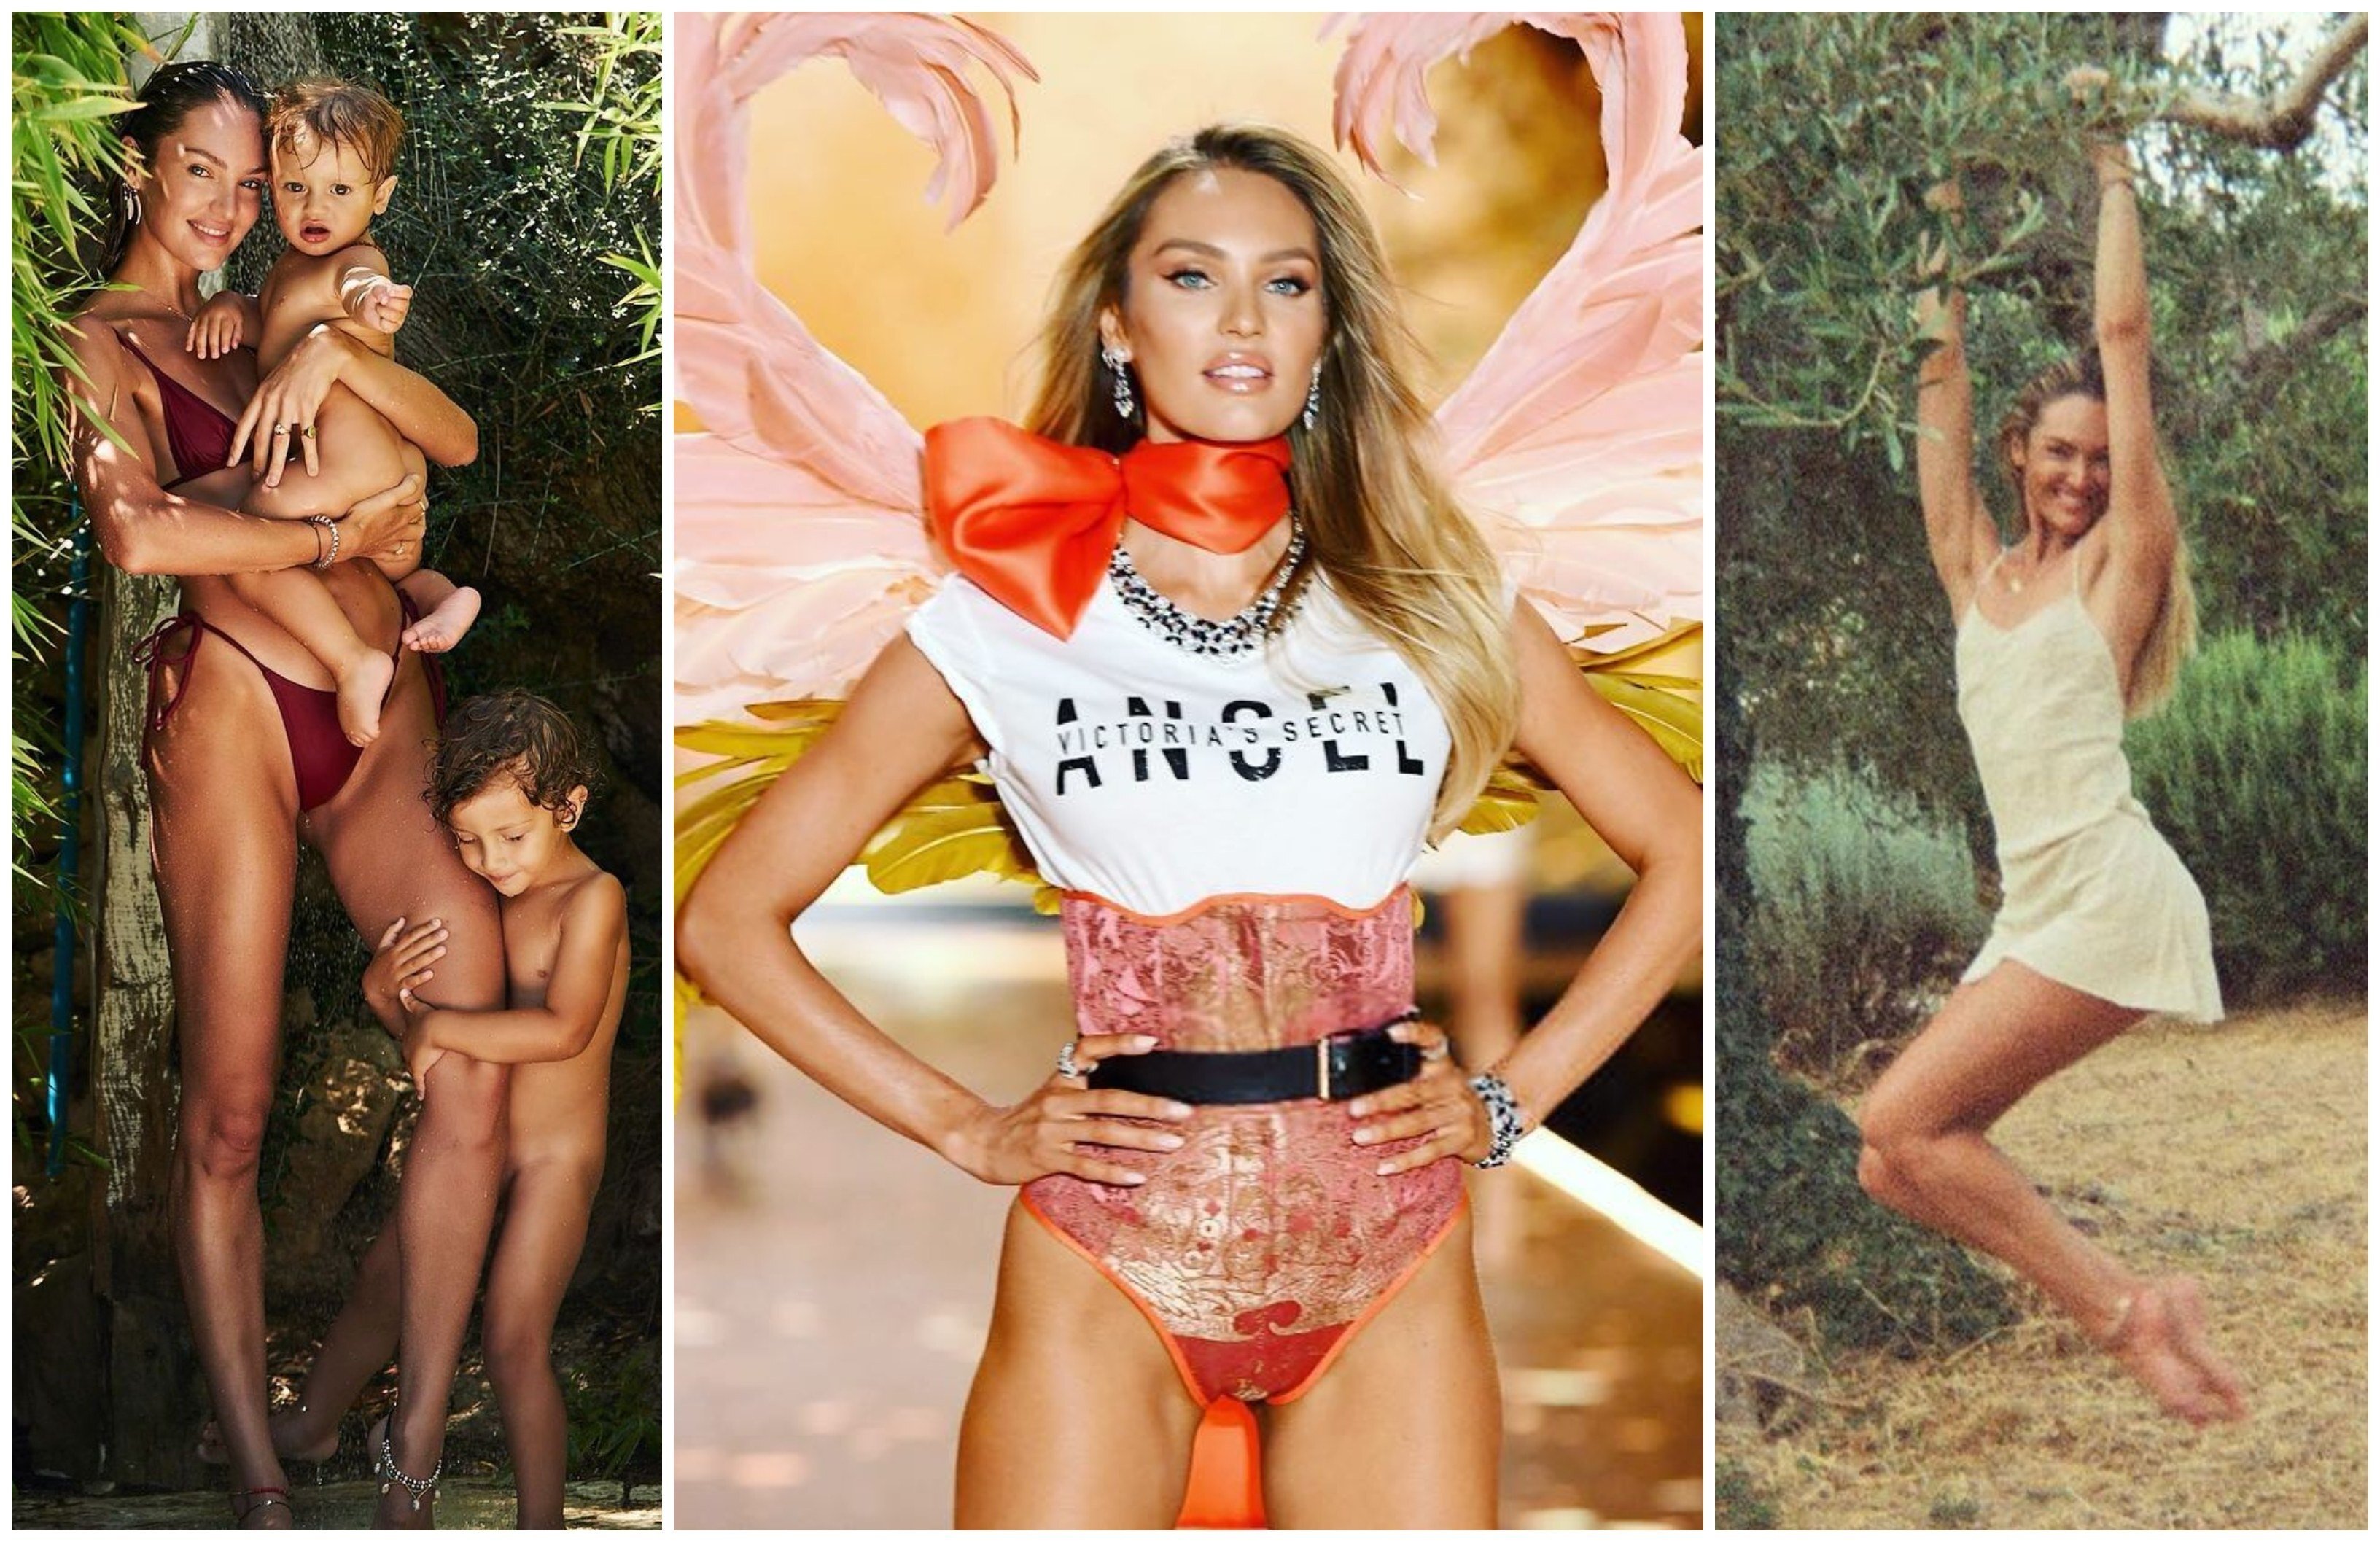 The Best Celebrity Instagrams Of The Week: Victoria's Secret Edition